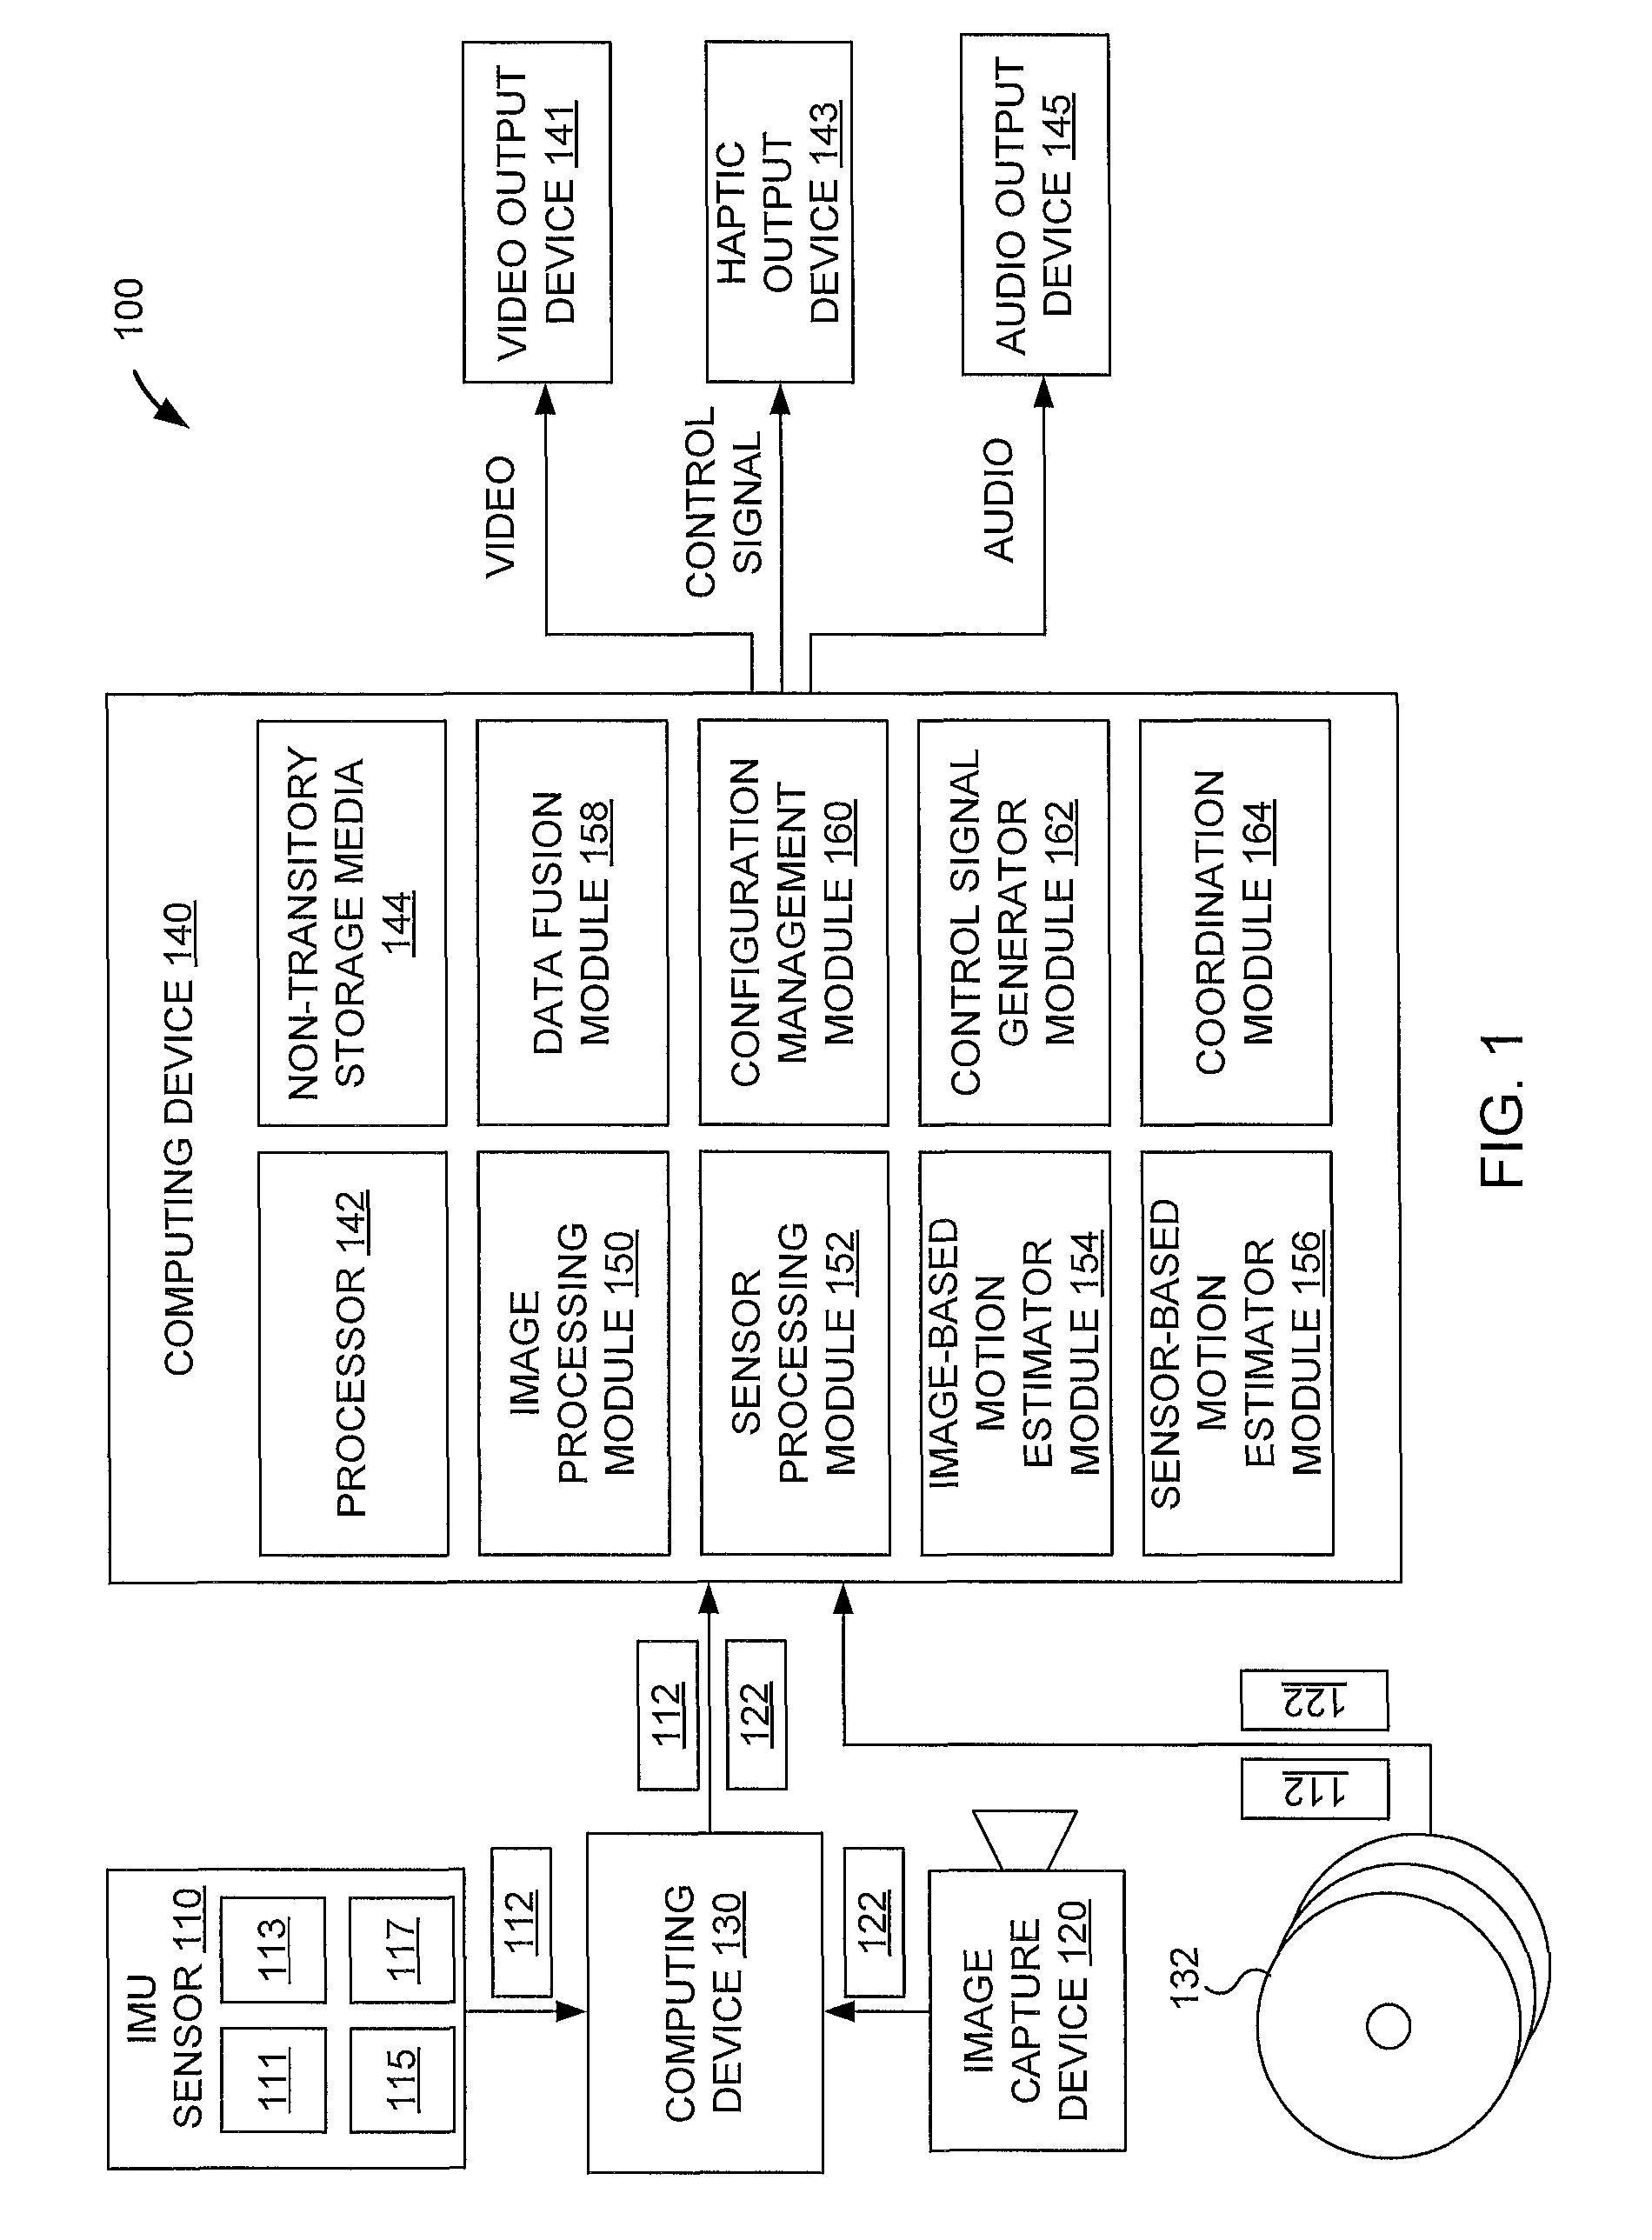 Method and apparatus to generate haptic feedback from video content analysis